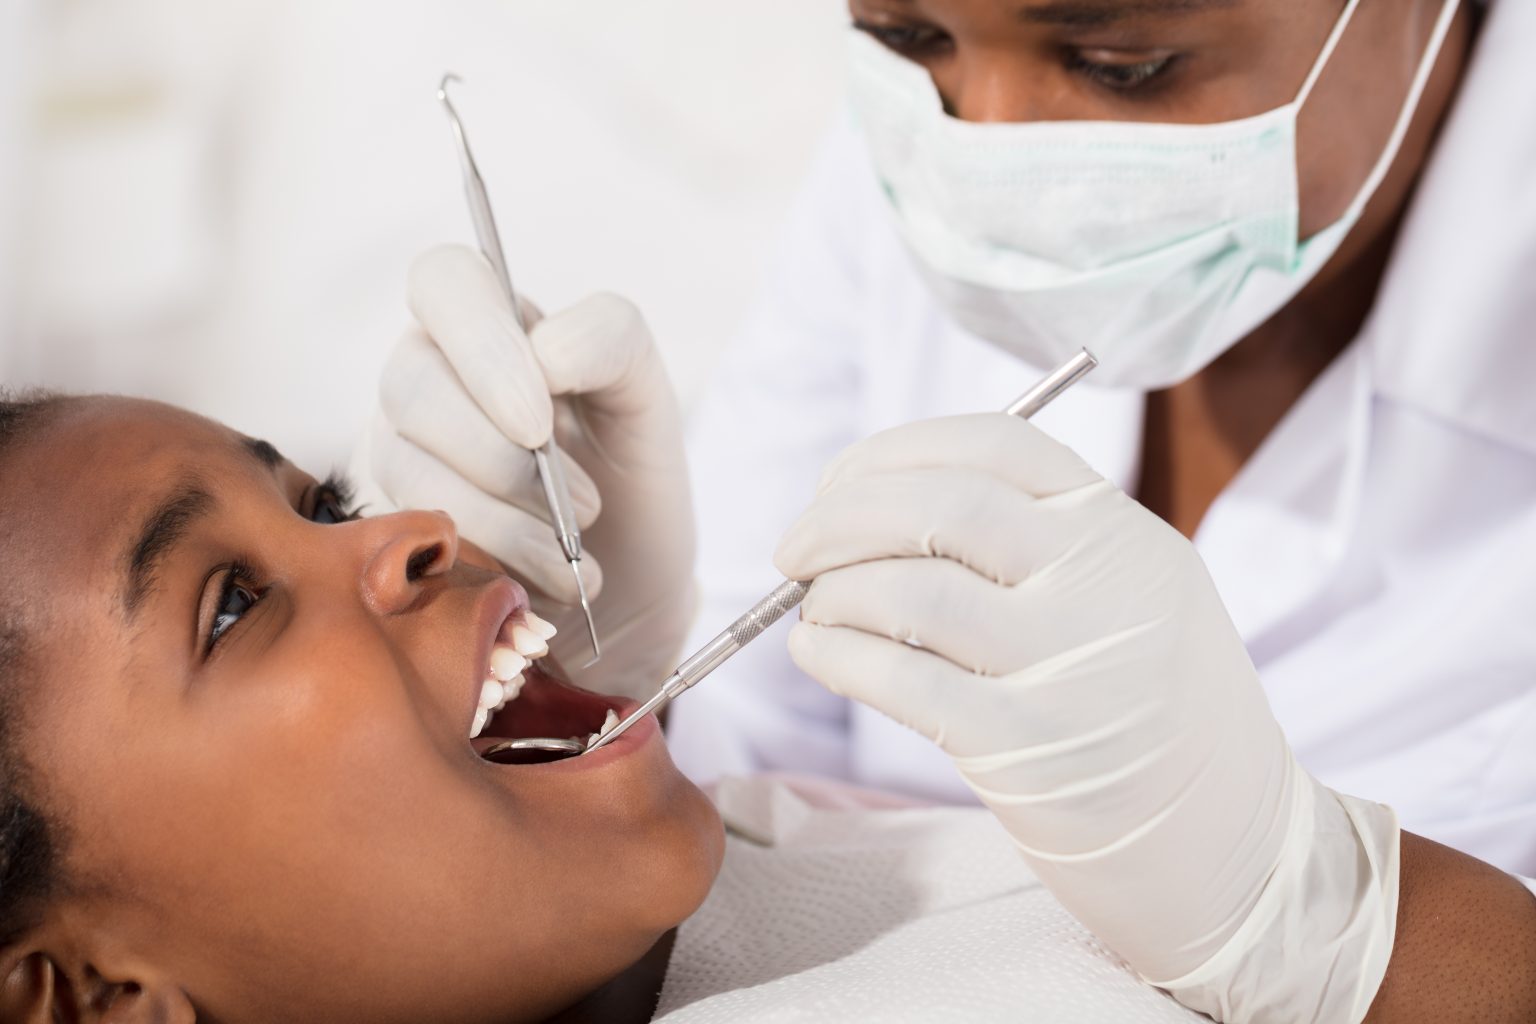 African Girl With Mouth Open During Oral Checkup